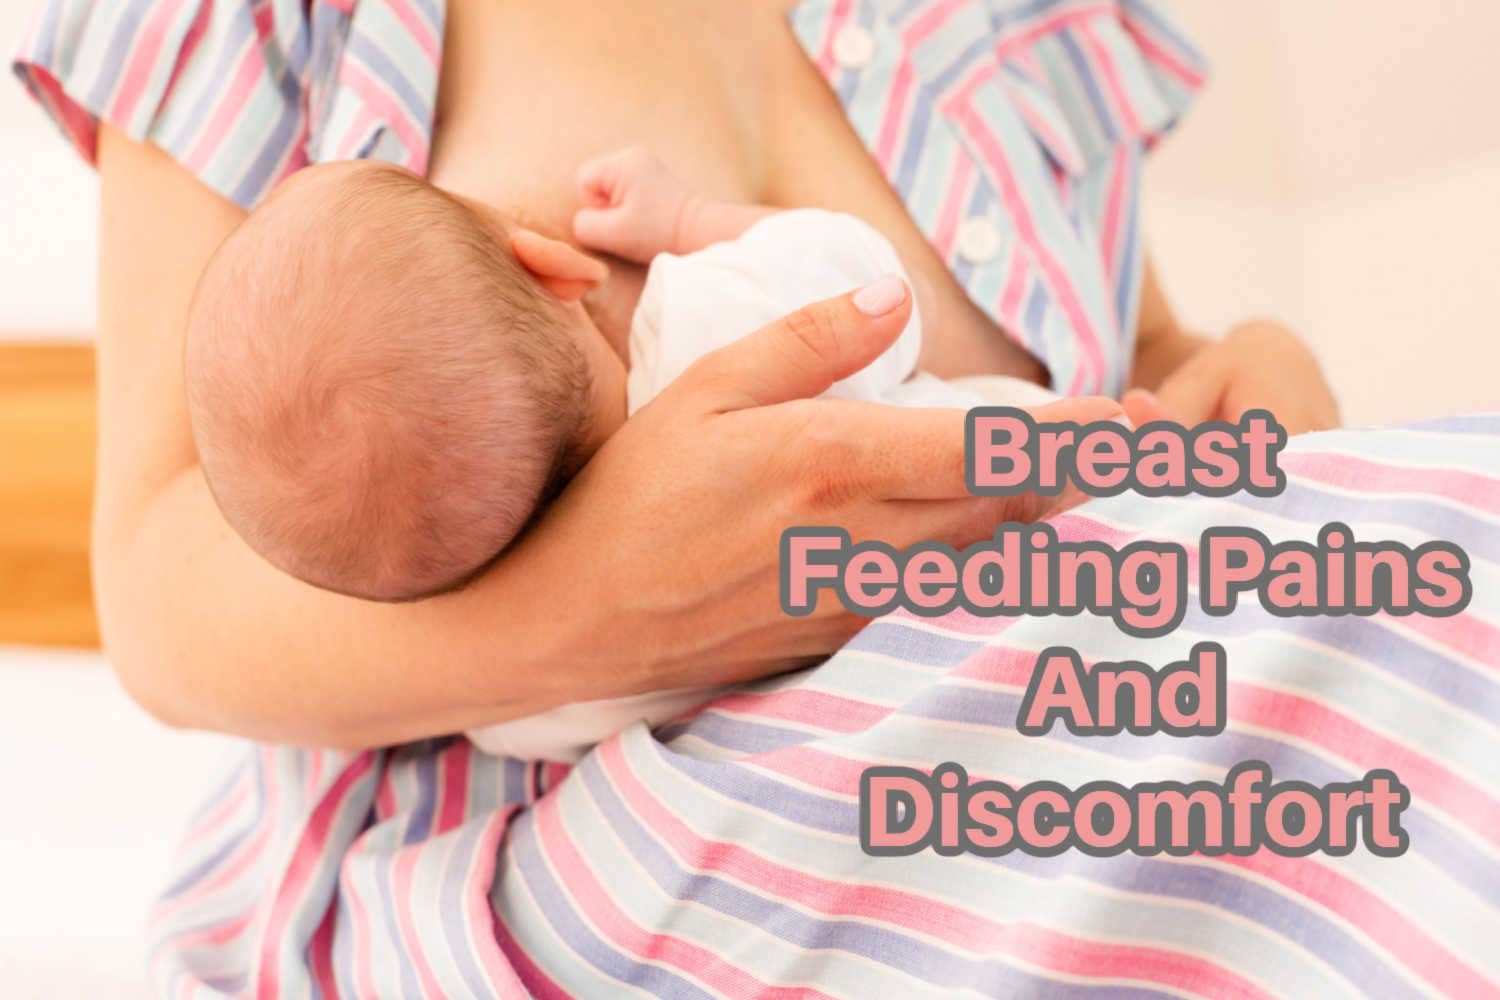 Breastfeeding Pains and Discomfort